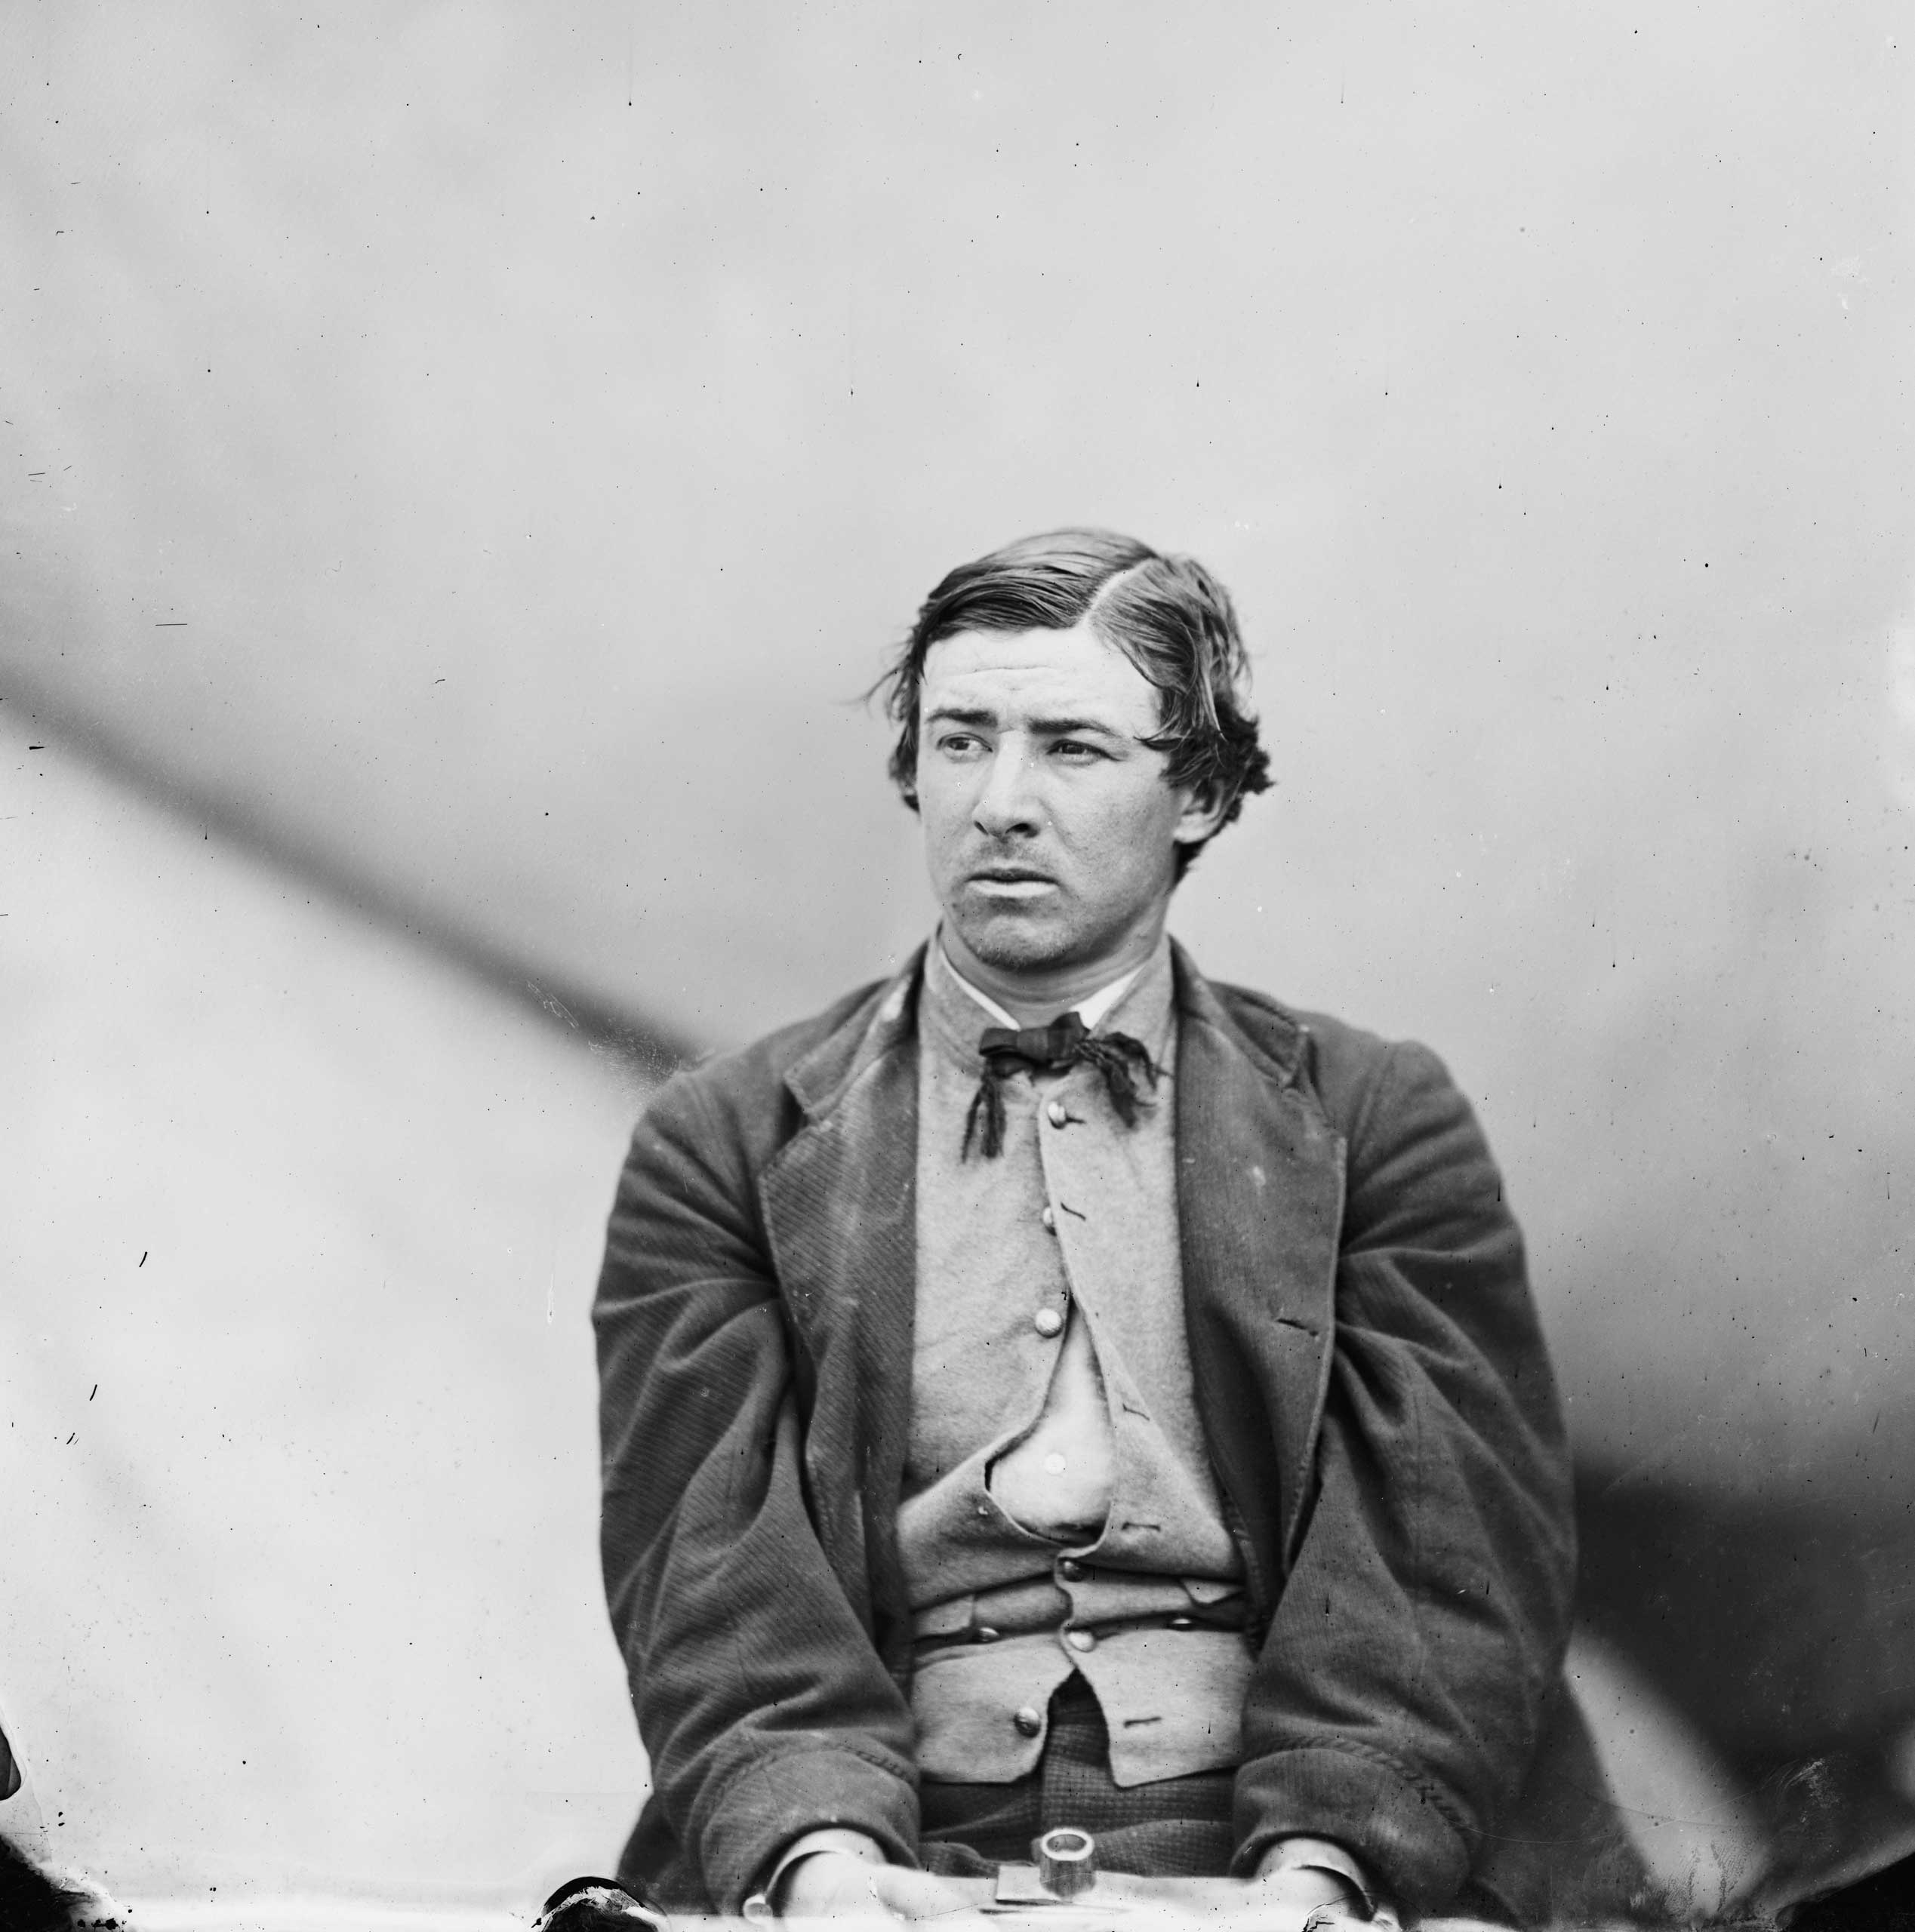 David E. Herold, a conspirator in the assassination of President Lincoln, in the Washington Navy Yard, April-July 1865.